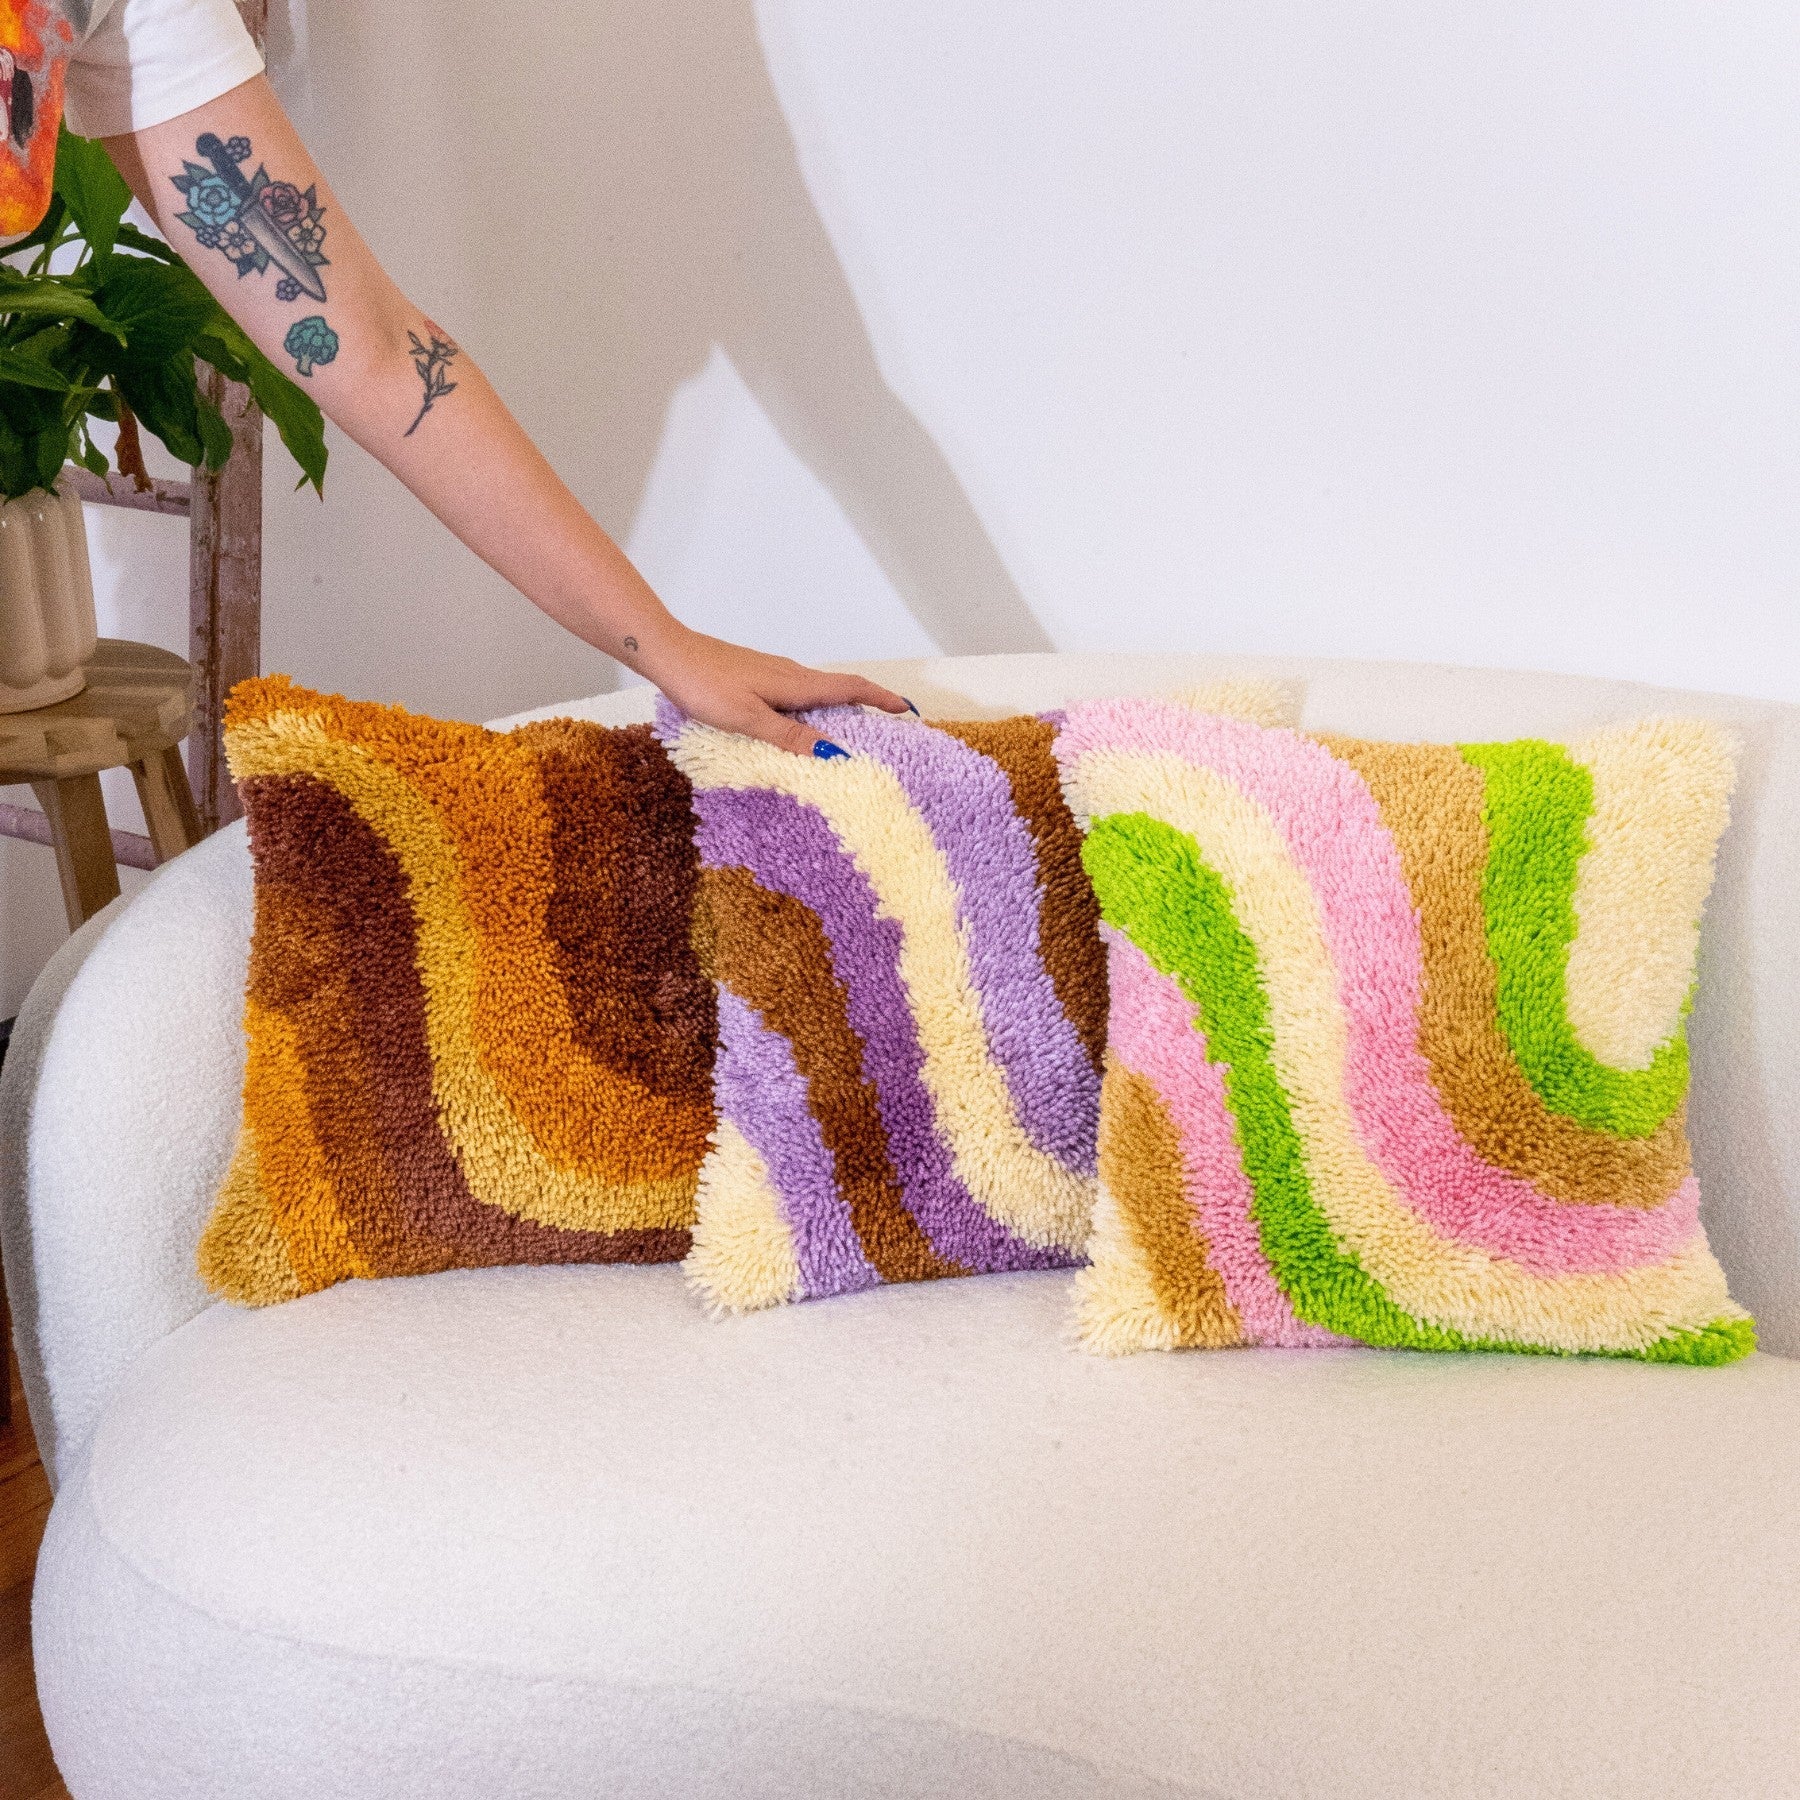 Three latch-hooked cushions sit on a white couch, a hand caresses one of the cushions. The cushion on the left is brown, the one in the middle is purple and the one on the right is green & pink